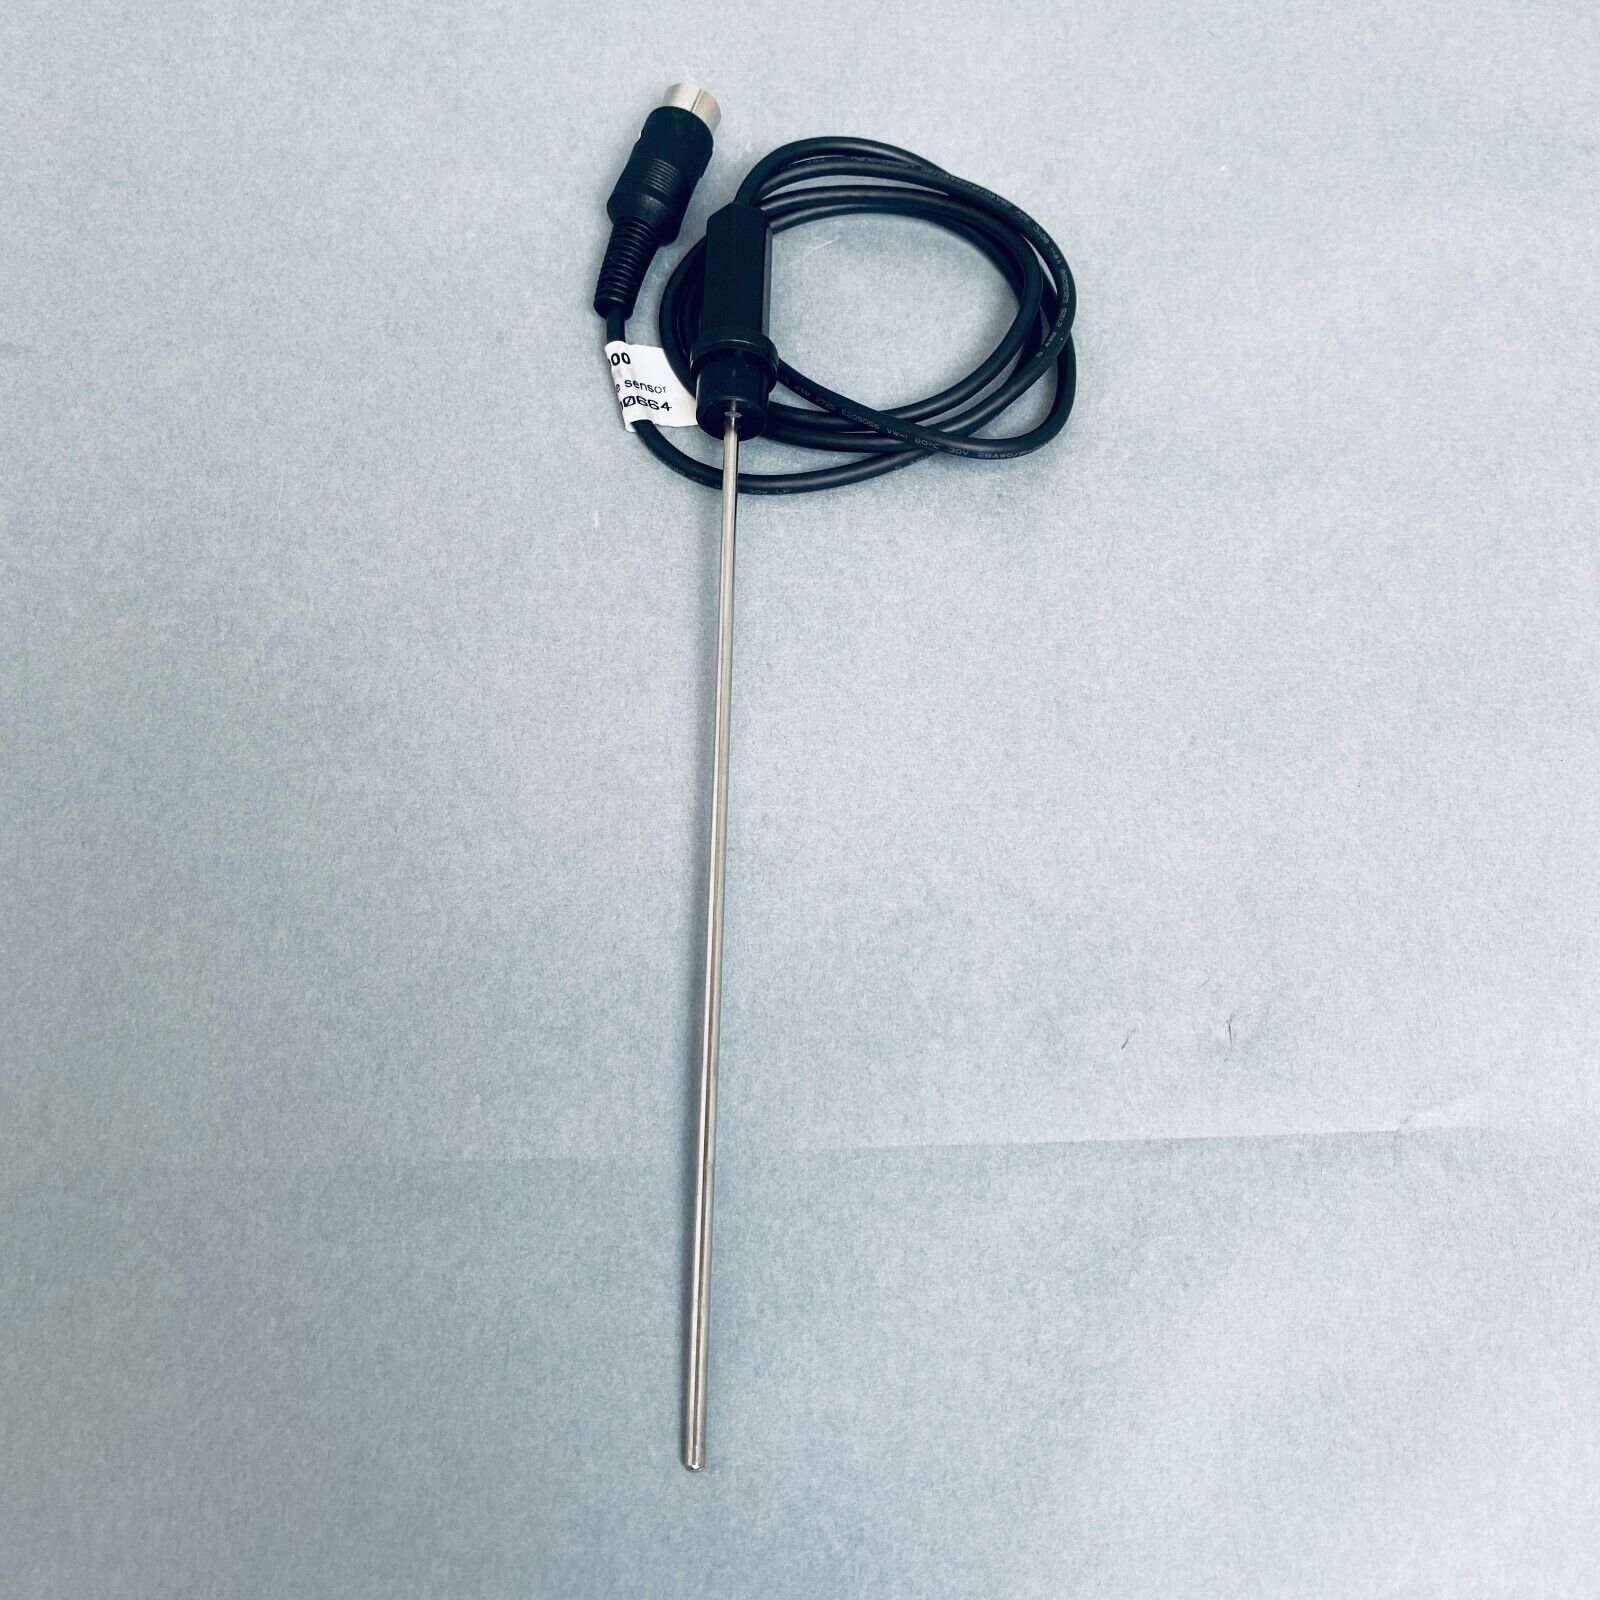 IKA Temperature Sensor Compatible with RCT, RET, and C-MAG HS Stirrers